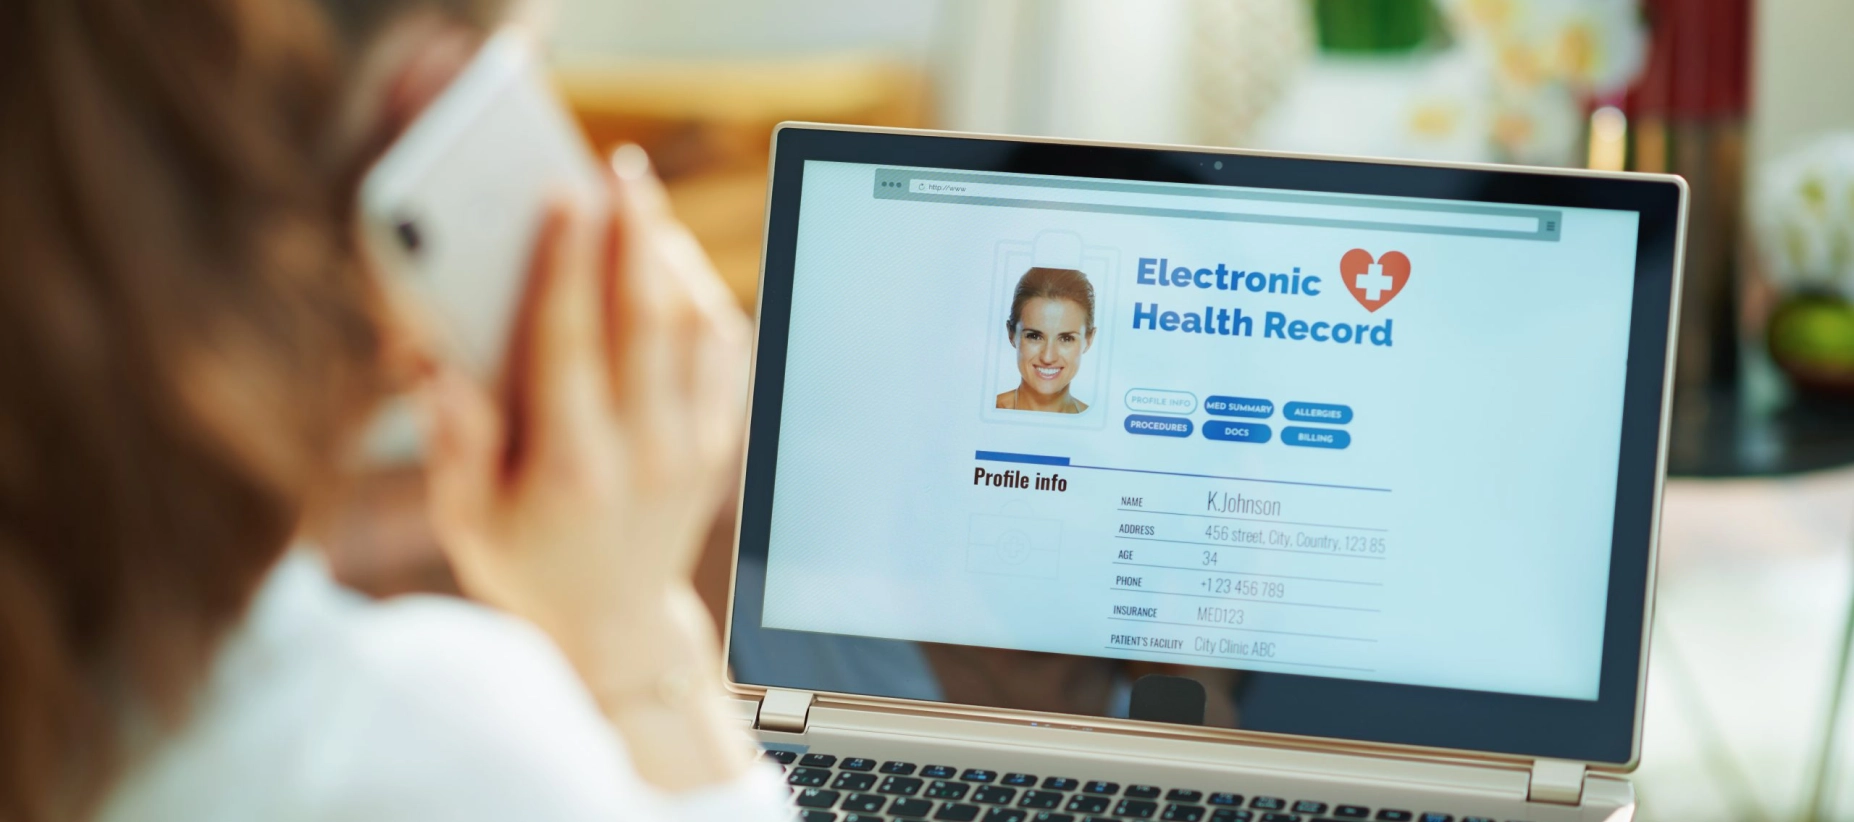 EMR/EHR Interfaces: 14 Principles of User-Friendly Interface